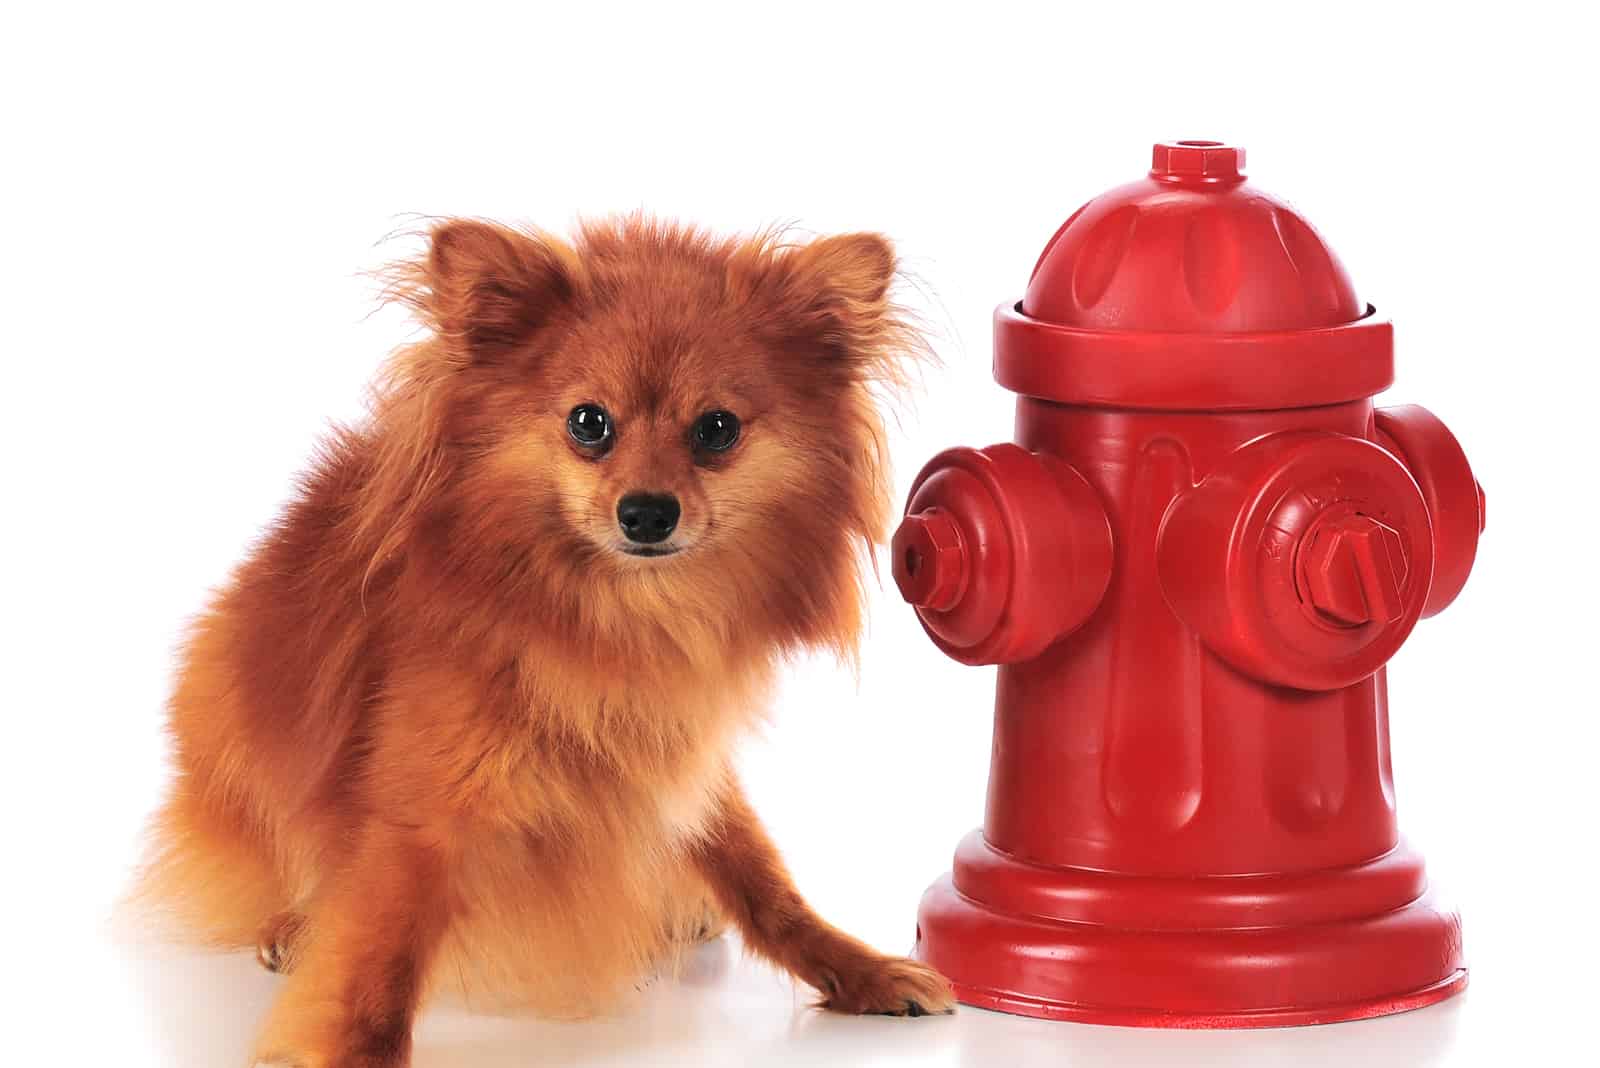 pomeranian standing next to a fire hydrant for dogs